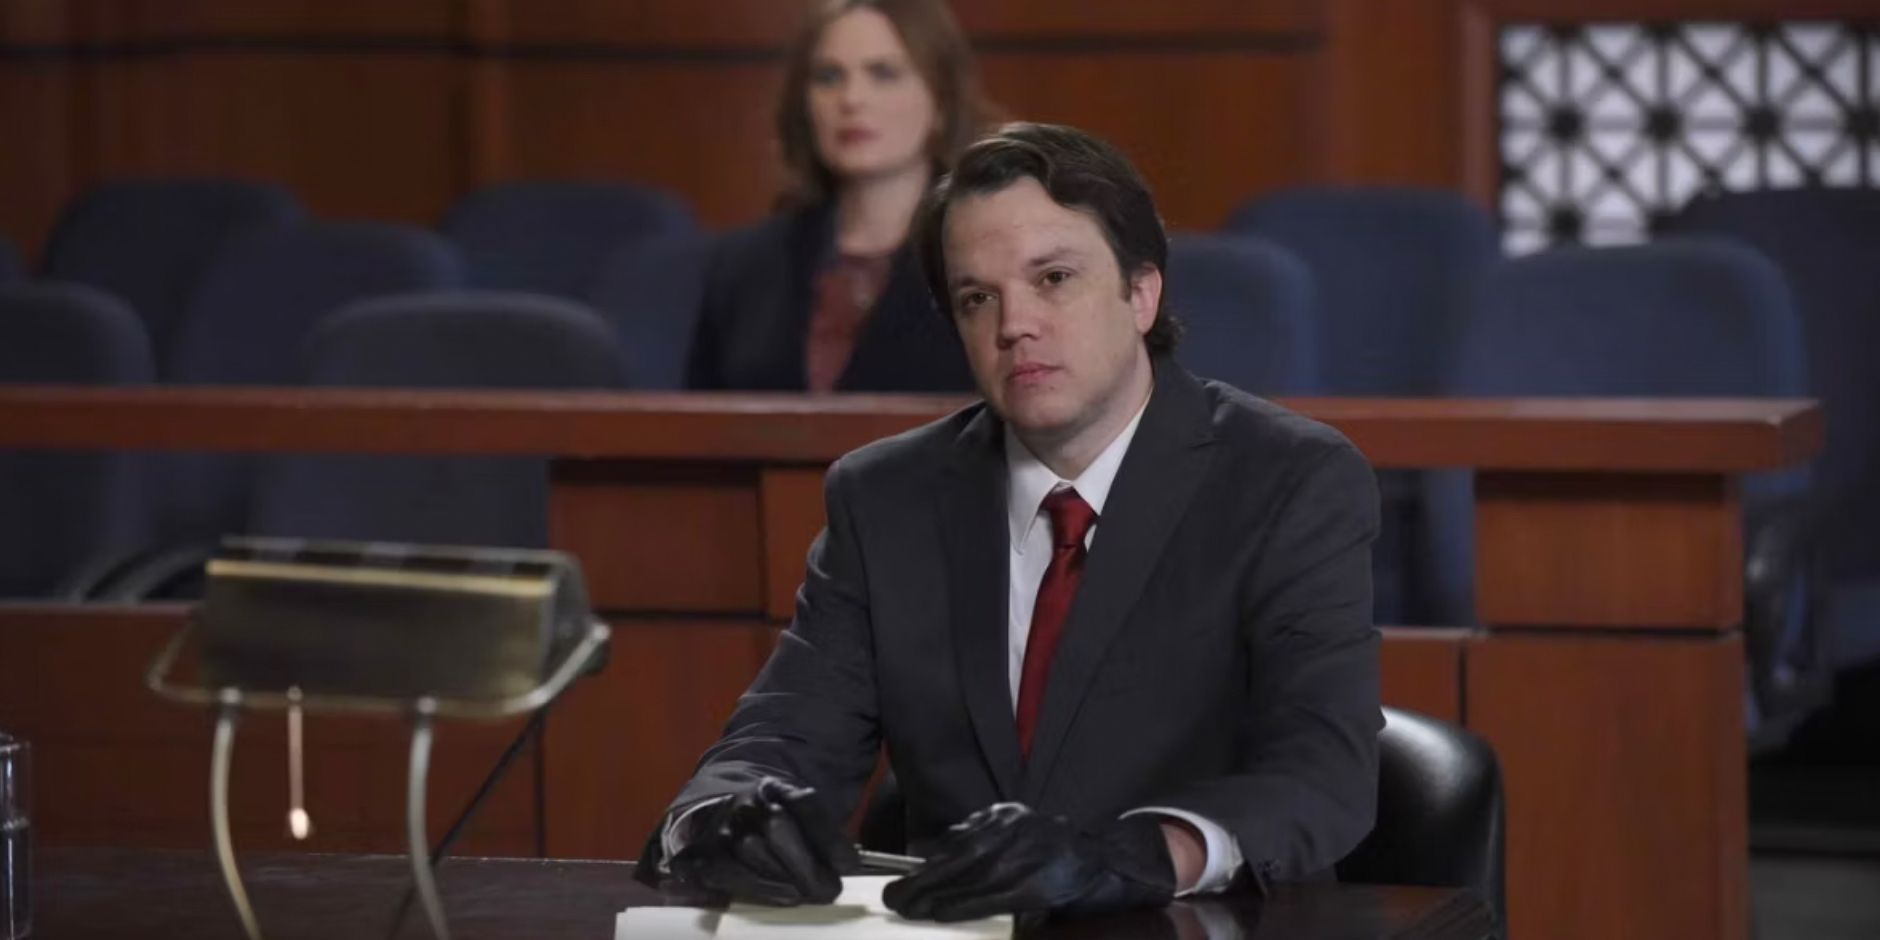 Zack sitting in a courtroom with Brennan behind him in Bones